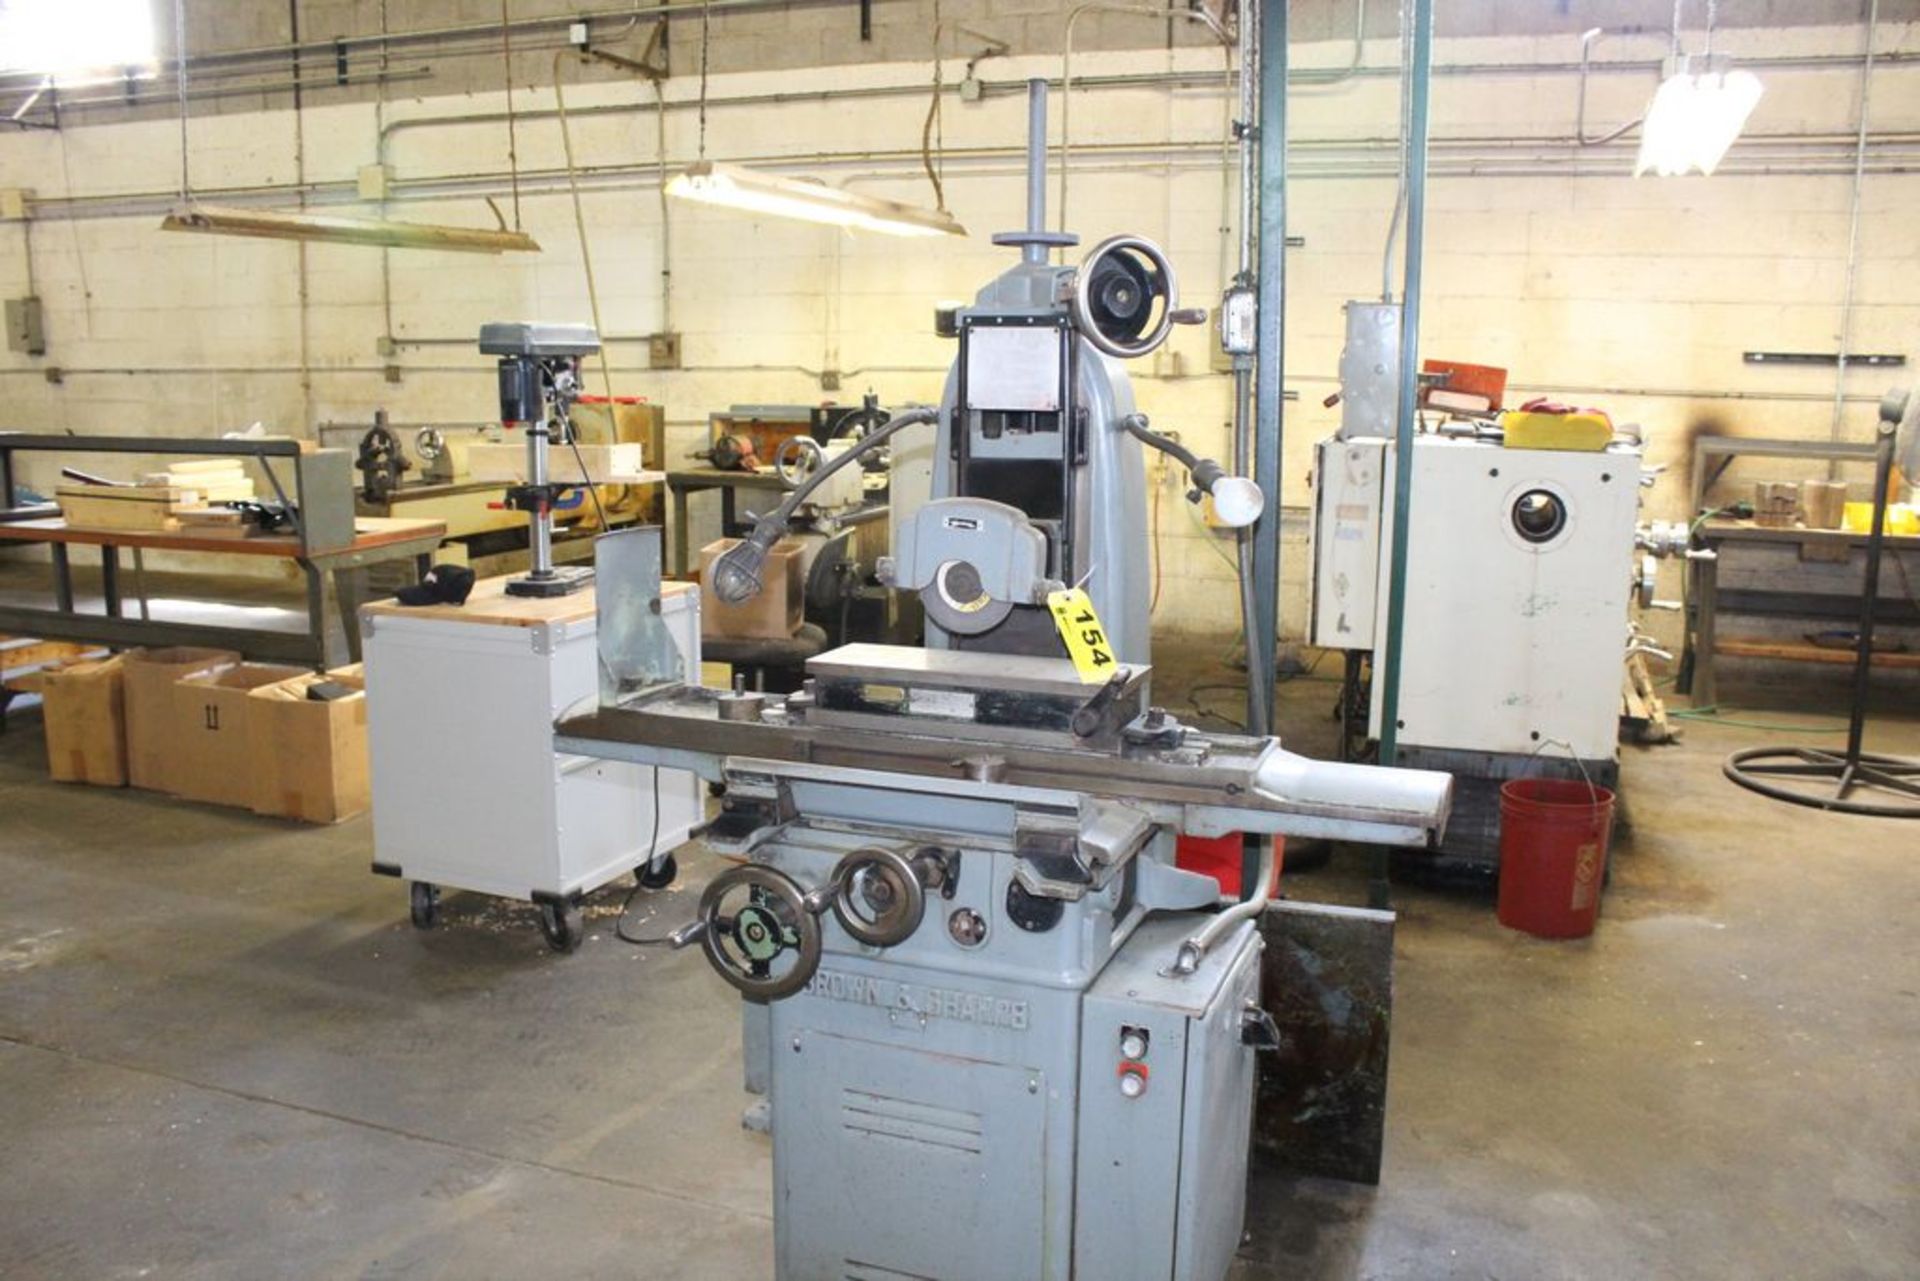 BROWN & SHARPE 6öX18ö NO, 2LB SURFACE GRINDER, S/N 523-2-1396, WITH PERMANENT MAGNETIC CHUCK